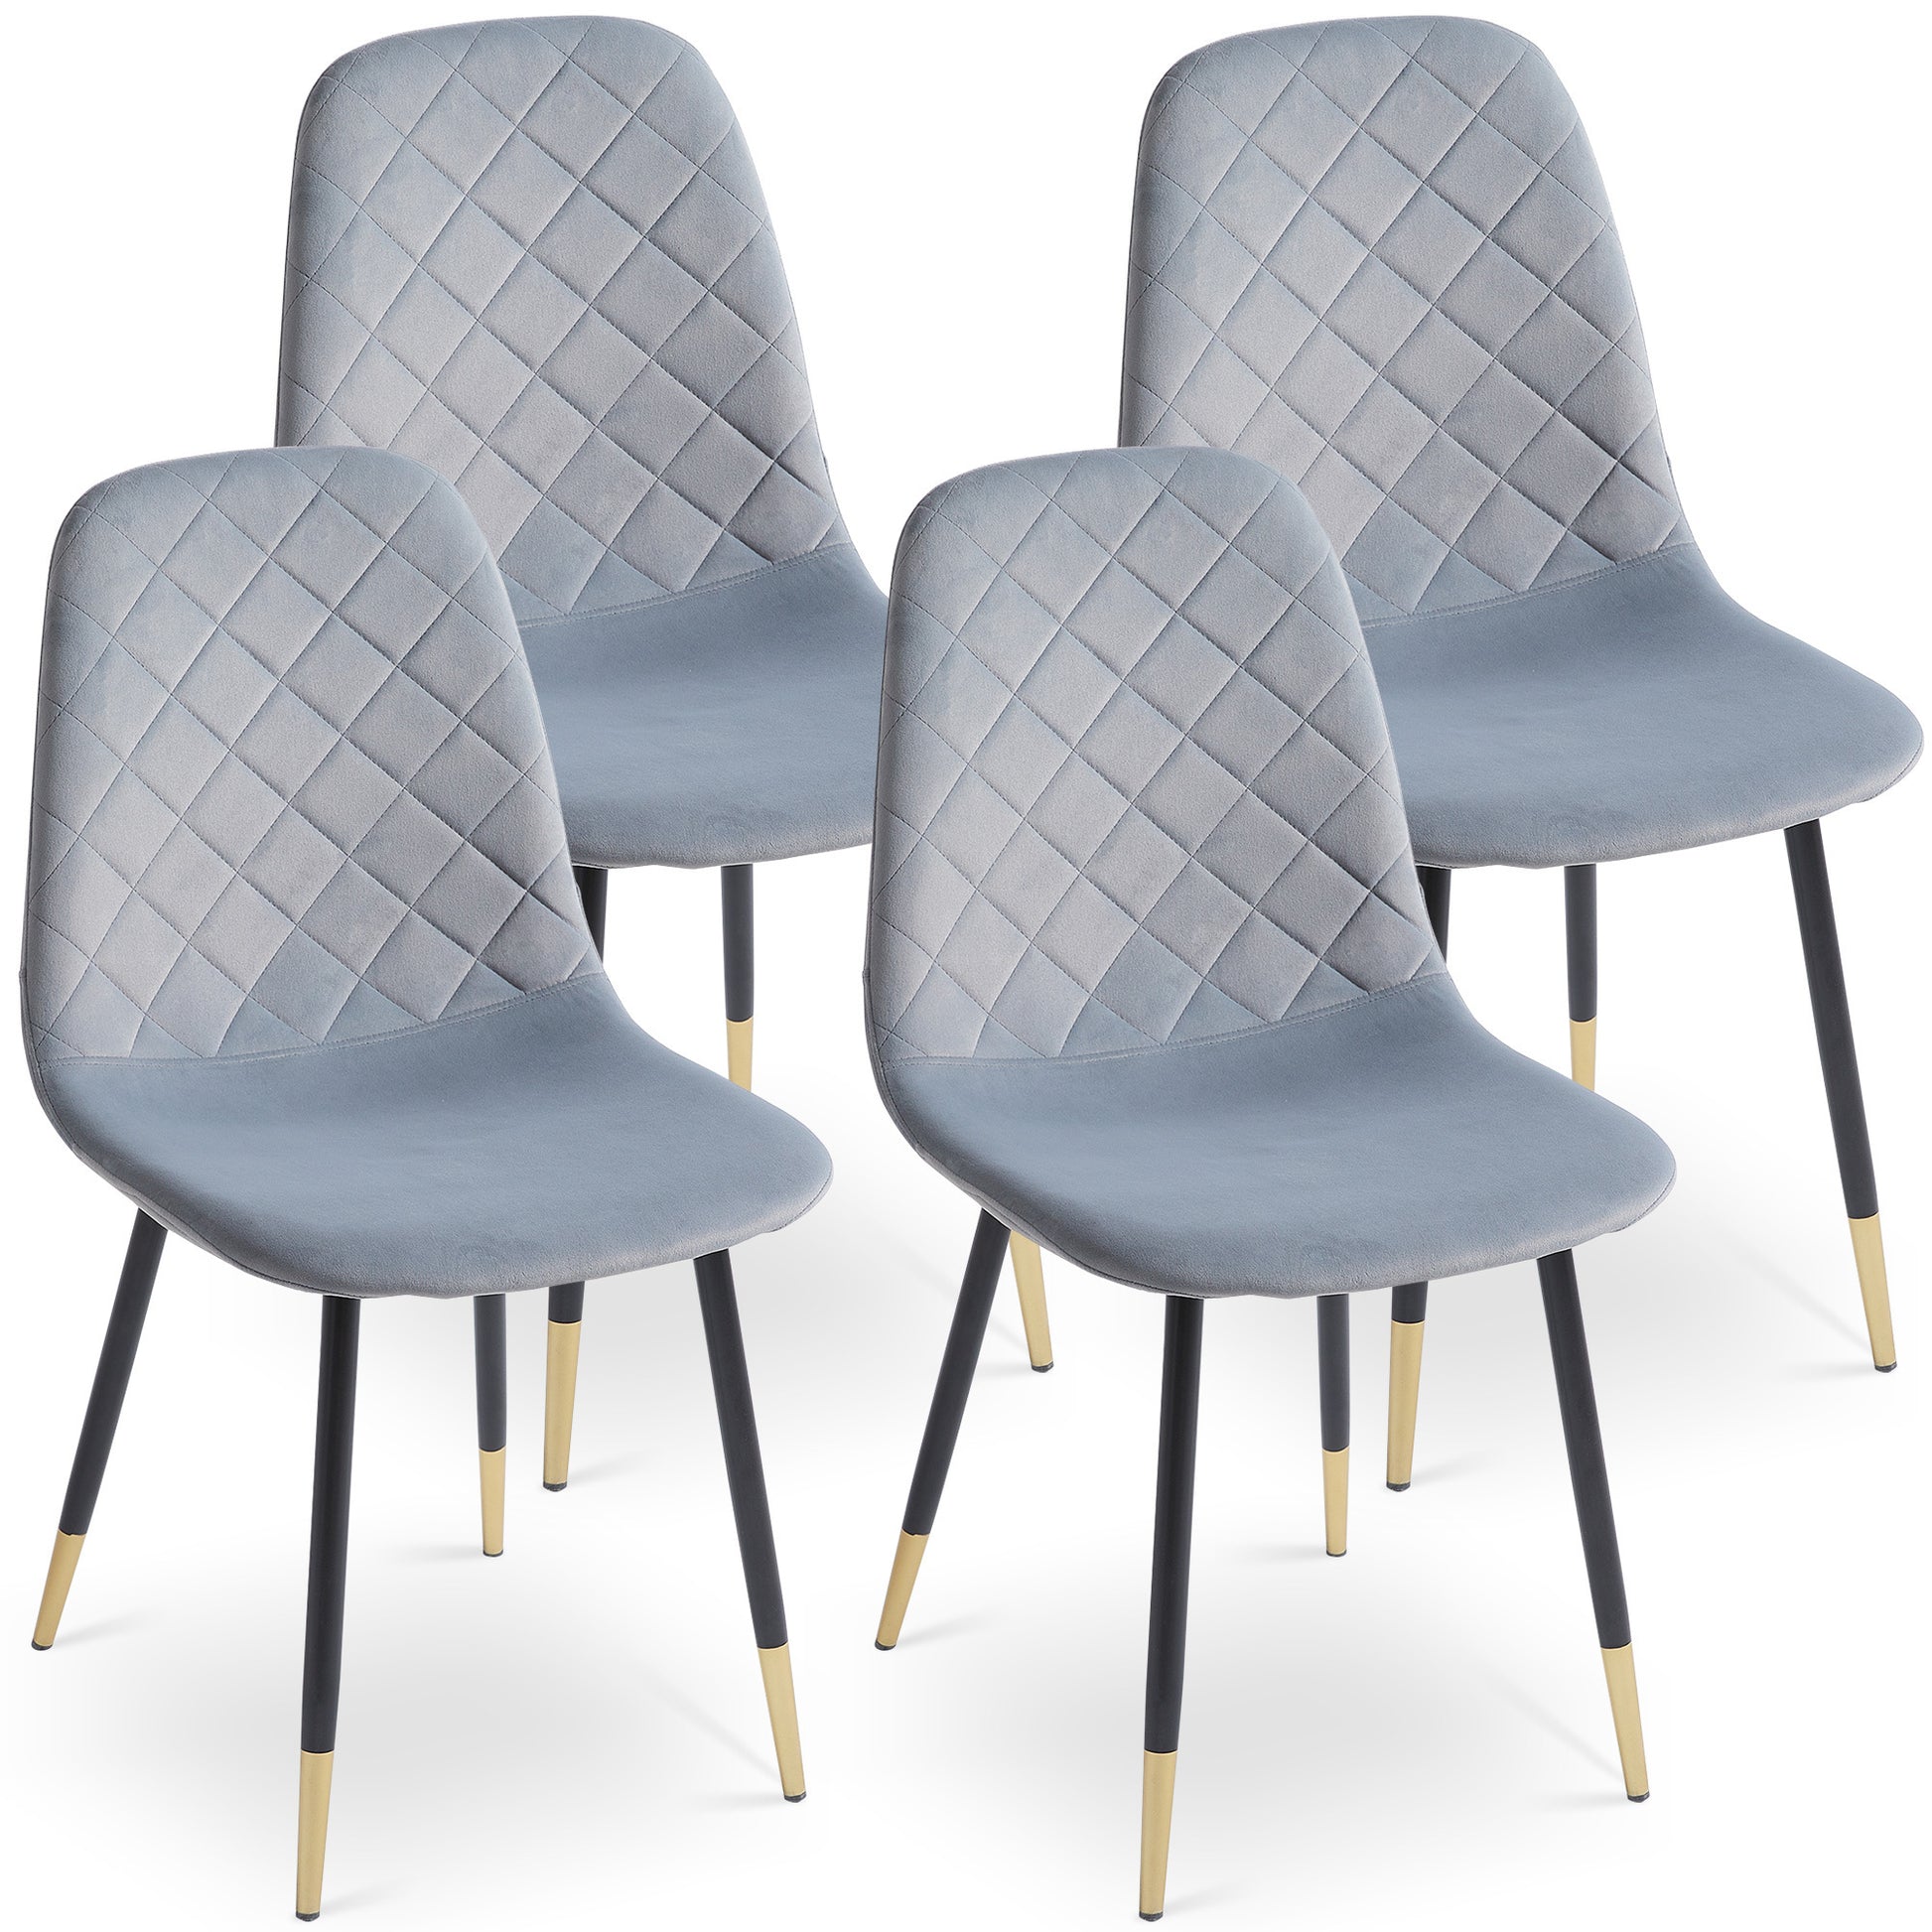 Grey Velvet Tufted Accent Chairs with Gold Metal Legs, Modern Dining Chairs for Living Room,Set of 4